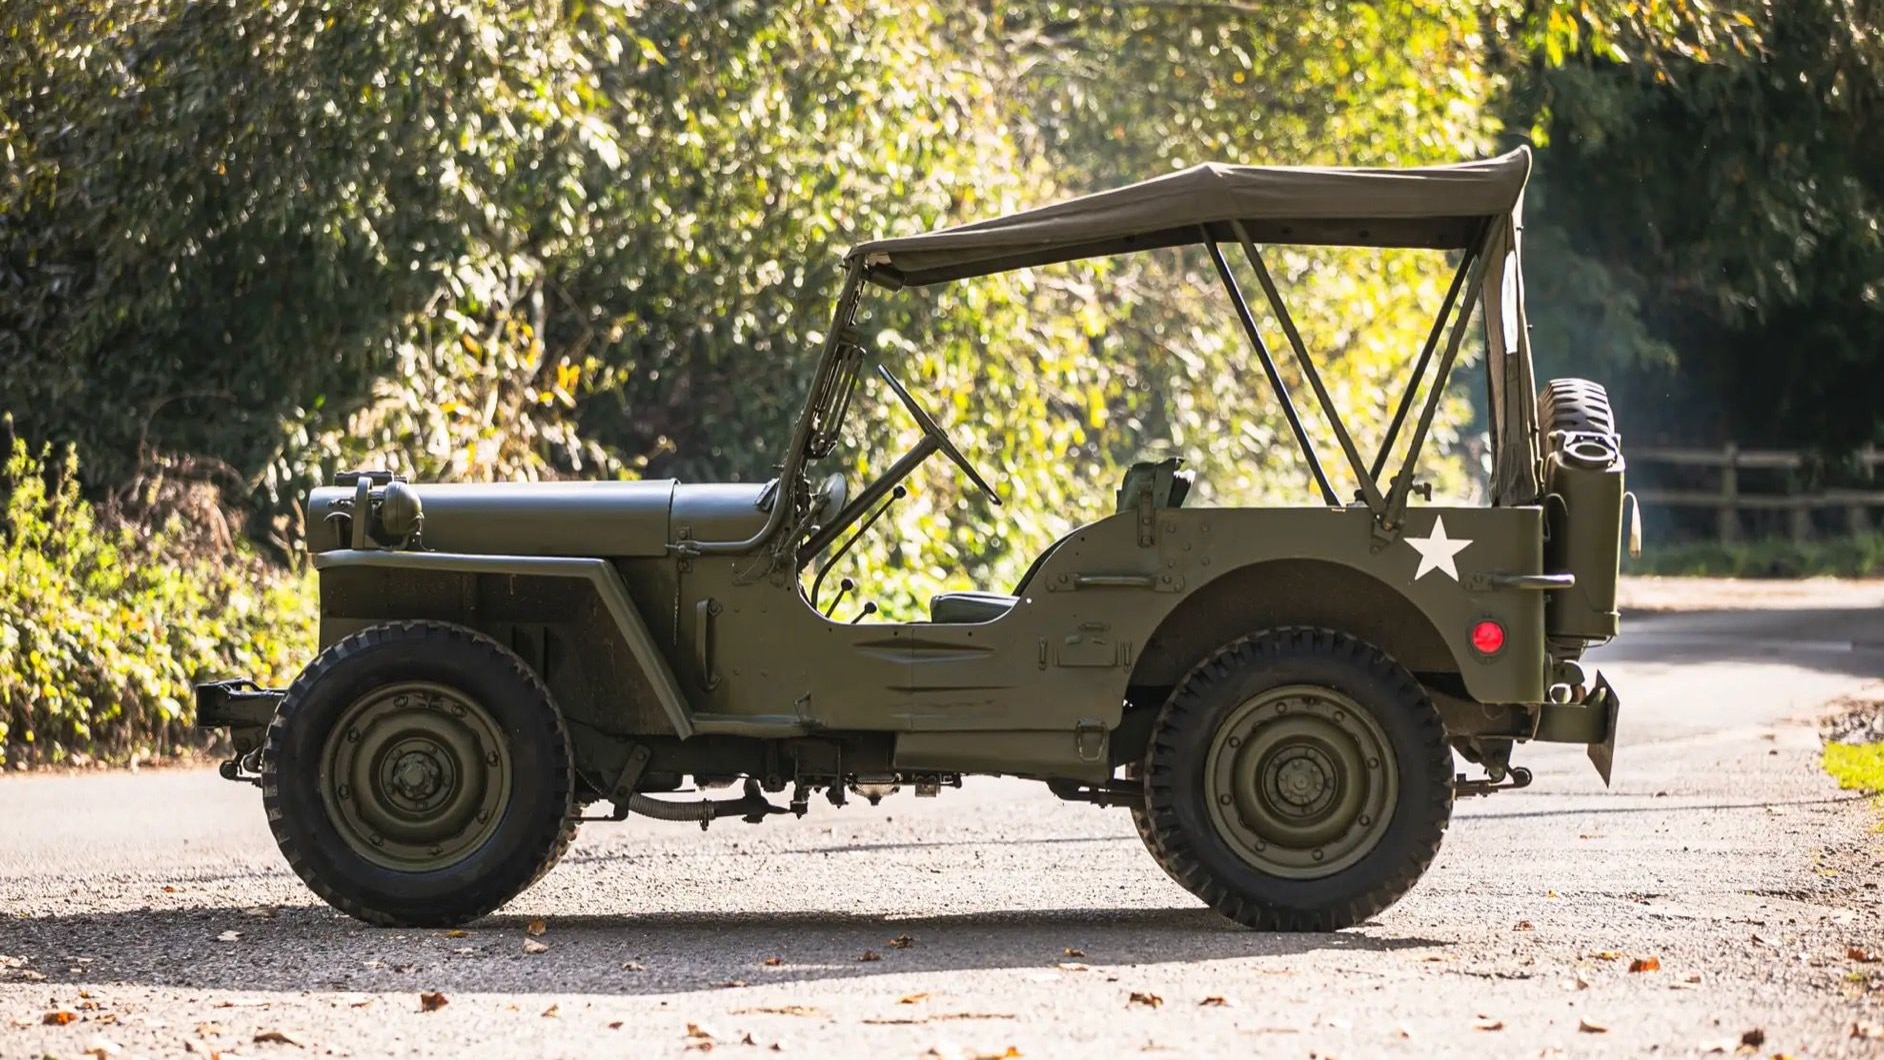 1944 Willys Jeep from "Saving Private Ryan" (photo via Iconic Auctioneers)